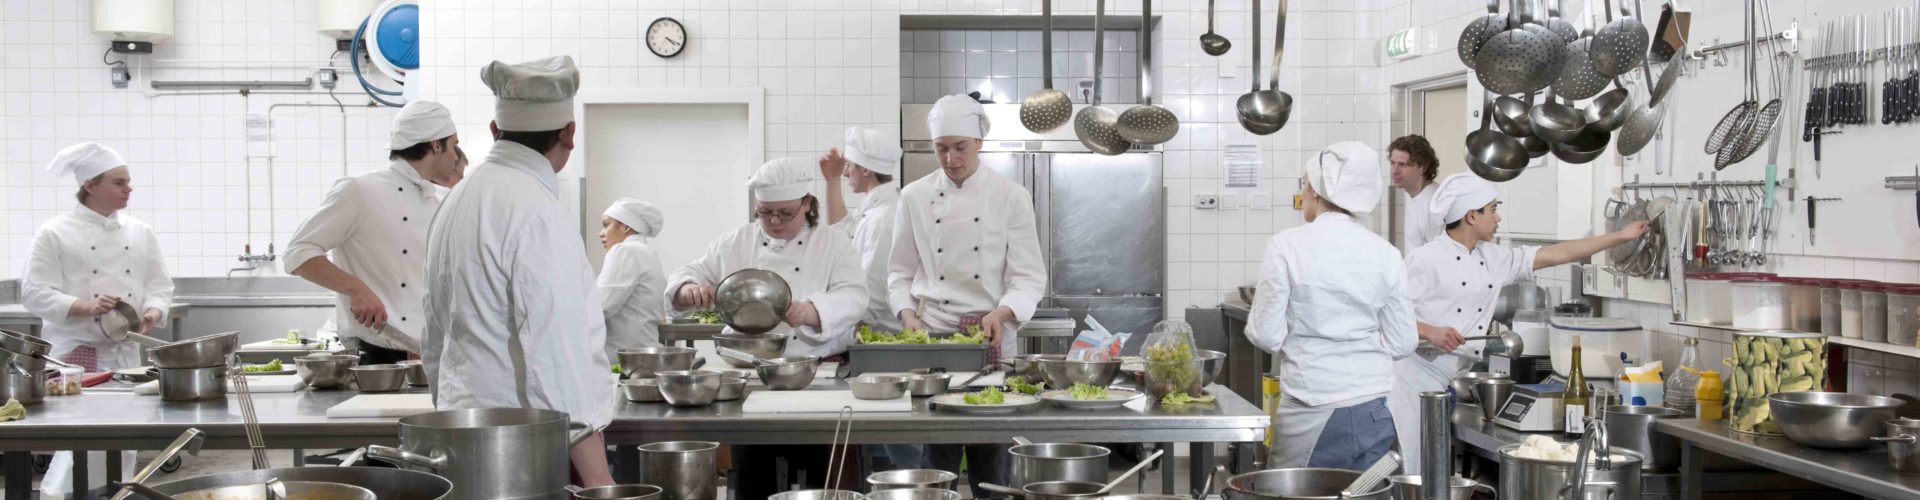 chefs working together in a commercial kitchen